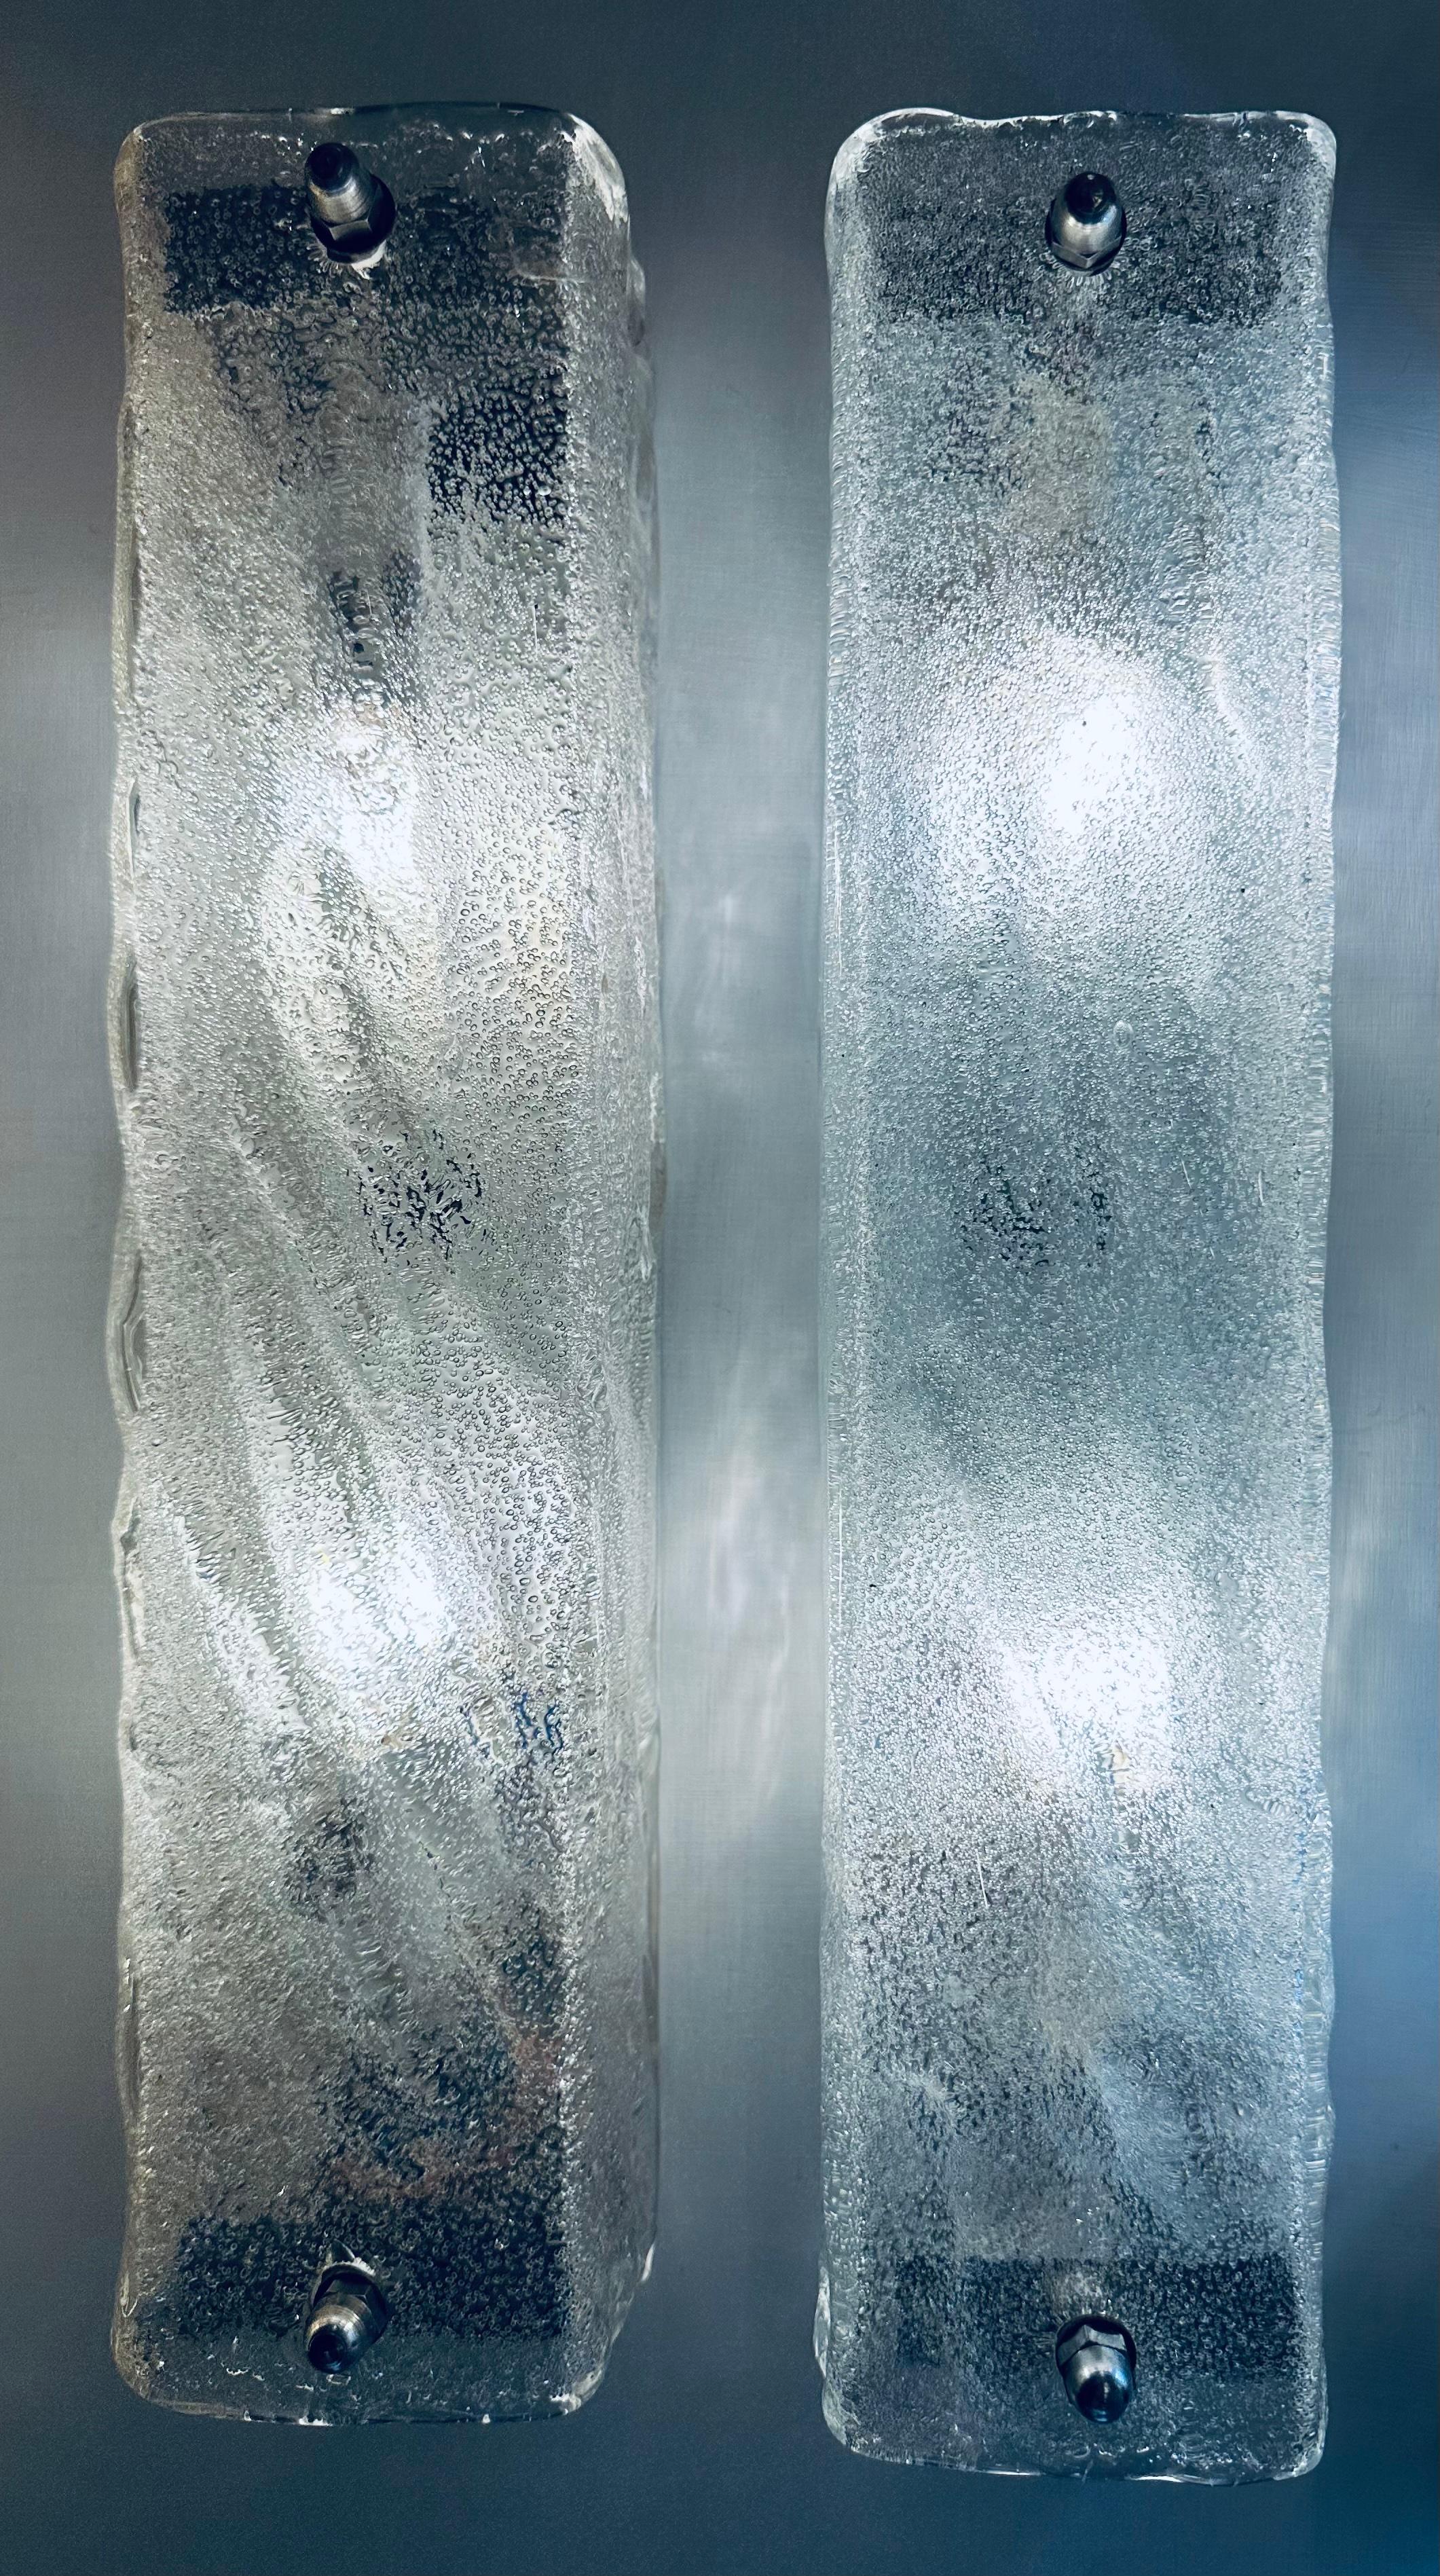 Pair of 1970s frosted iced-glass wall sconces or wall lights manufactured by the upmarket German light manufacturer Kaiser Leuchten. The rectangular thick textured glass screws on to a white metal frame which is easily screwed into the wall. The